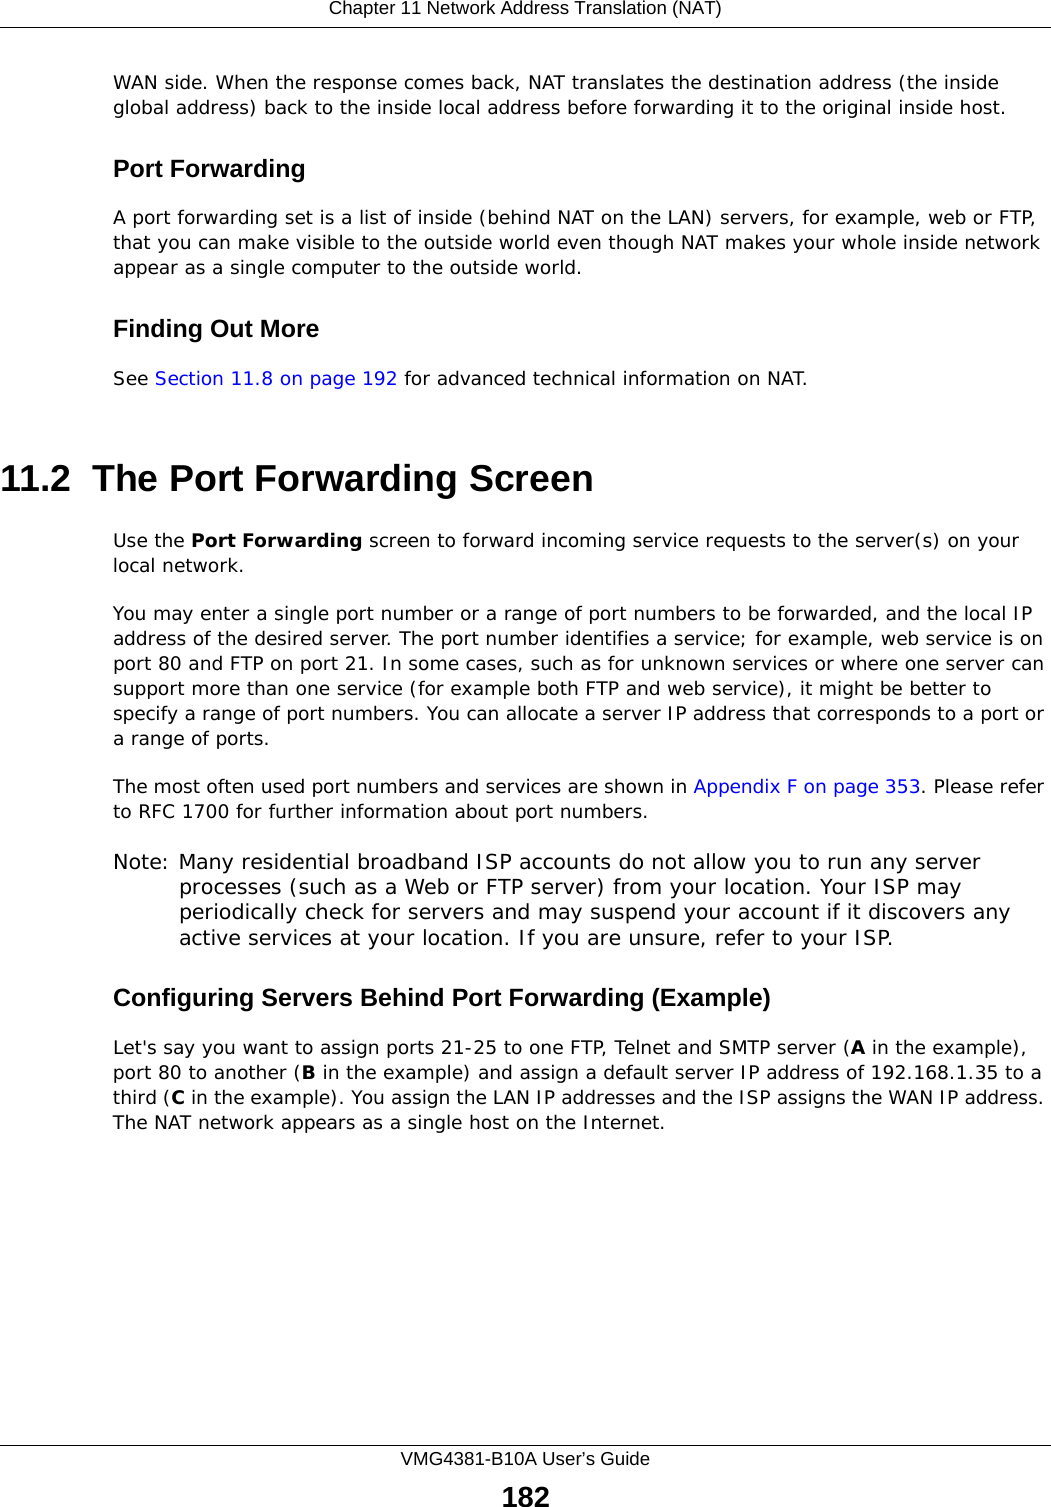 Chapter 11 Network Address Translation (NAT)VMG4381-B10A User’s Guide182WAN side. When the response comes back, NAT translates the destination address (the inside global address) back to the inside local address before forwarding it to the original inside host.Port ForwardingA port forwarding set is a list of inside (behind NAT on the LAN) servers, for example, web or FTP, that you can make visible to the outside world even though NAT makes your whole inside network appear as a single computer to the outside world.Finding Out MoreSee Section 11.8 on page 192 for advanced technical information on NAT.11.2  The Port Forwarding Screen Use the Port Forwarding screen to forward incoming service requests to the server(s) on your local network.You may enter a single port number or a range of port numbers to be forwarded, and the local IP address of the desired server. The port number identifies a service; for example, web service is on port 80 and FTP on port 21. In some cases, such as for unknown services or where one server can support more than one service (for example both FTP and web service), it might be better to specify a range of port numbers. You can allocate a server IP address that corresponds to a port or a range of ports.The most often used port numbers and services are shown in Appendix F on page 353. Please refer to RFC 1700 for further information about port numbers. Note: Many residential broadband ISP accounts do not allow you to run any server processes (such as a Web or FTP server) from your location. Your ISP may periodically check for servers and may suspend your account if it discovers any active services at your location. If you are unsure, refer to your ISP.Configuring Servers Behind Port Forwarding (Example)Let&apos;s say you want to assign ports 21-25 to one FTP, Telnet and SMTP server (A in the example), port 80 to another (B in the example) and assign a default server IP address of 192.168.1.35 to a third (C in the example). You assign the LAN IP addresses and the ISP assigns the WAN IP address. The NAT network appears as a single host on the Internet.